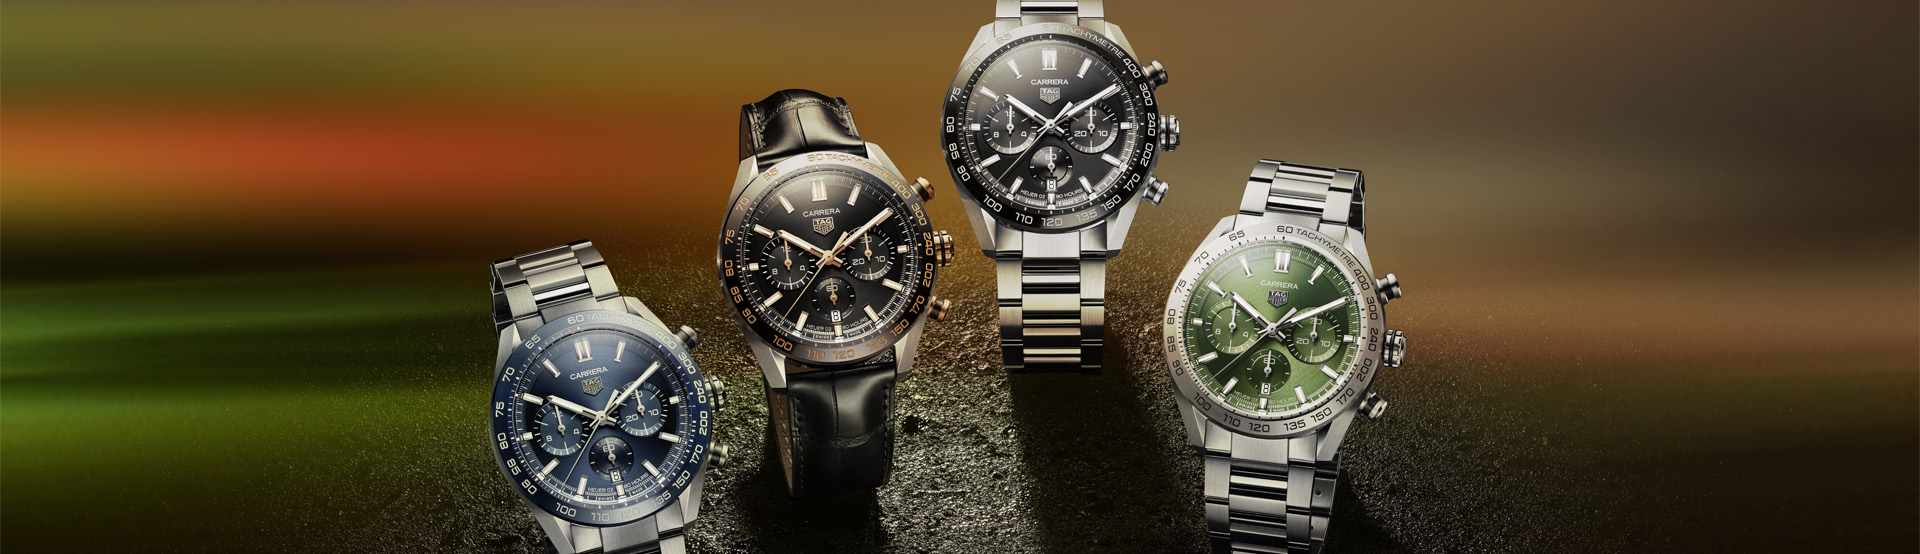 TAG Heuer | Sincere Fine Watches